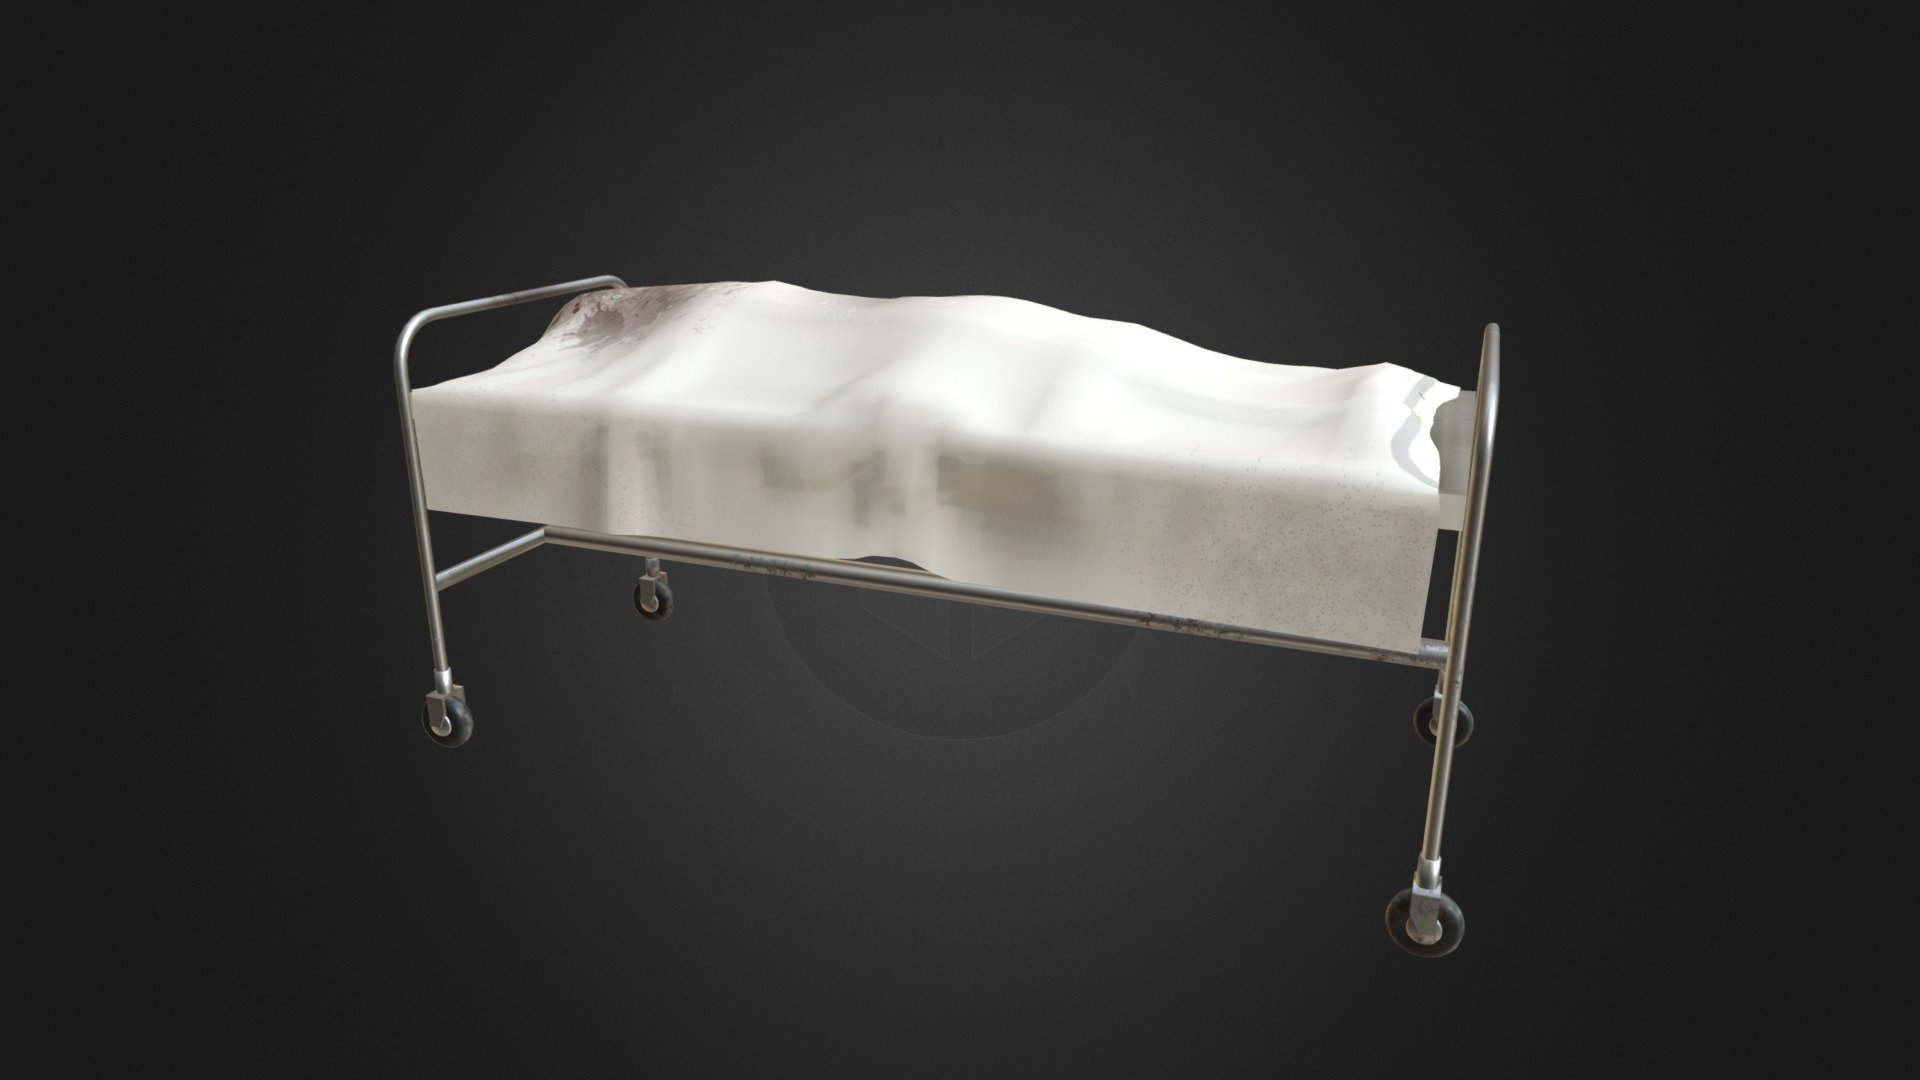 A cadaver carrier with a corpse hidden beneath a bloodied blanket. 

Modelled and textured for a project at university.

Modelled in: 3dsMax
Textured in: Substance Painter - Covered Cadaver Carrier - Buy Royalty Free 3D model by Isabella Kugler (@Isabella_Kugler) 3d model